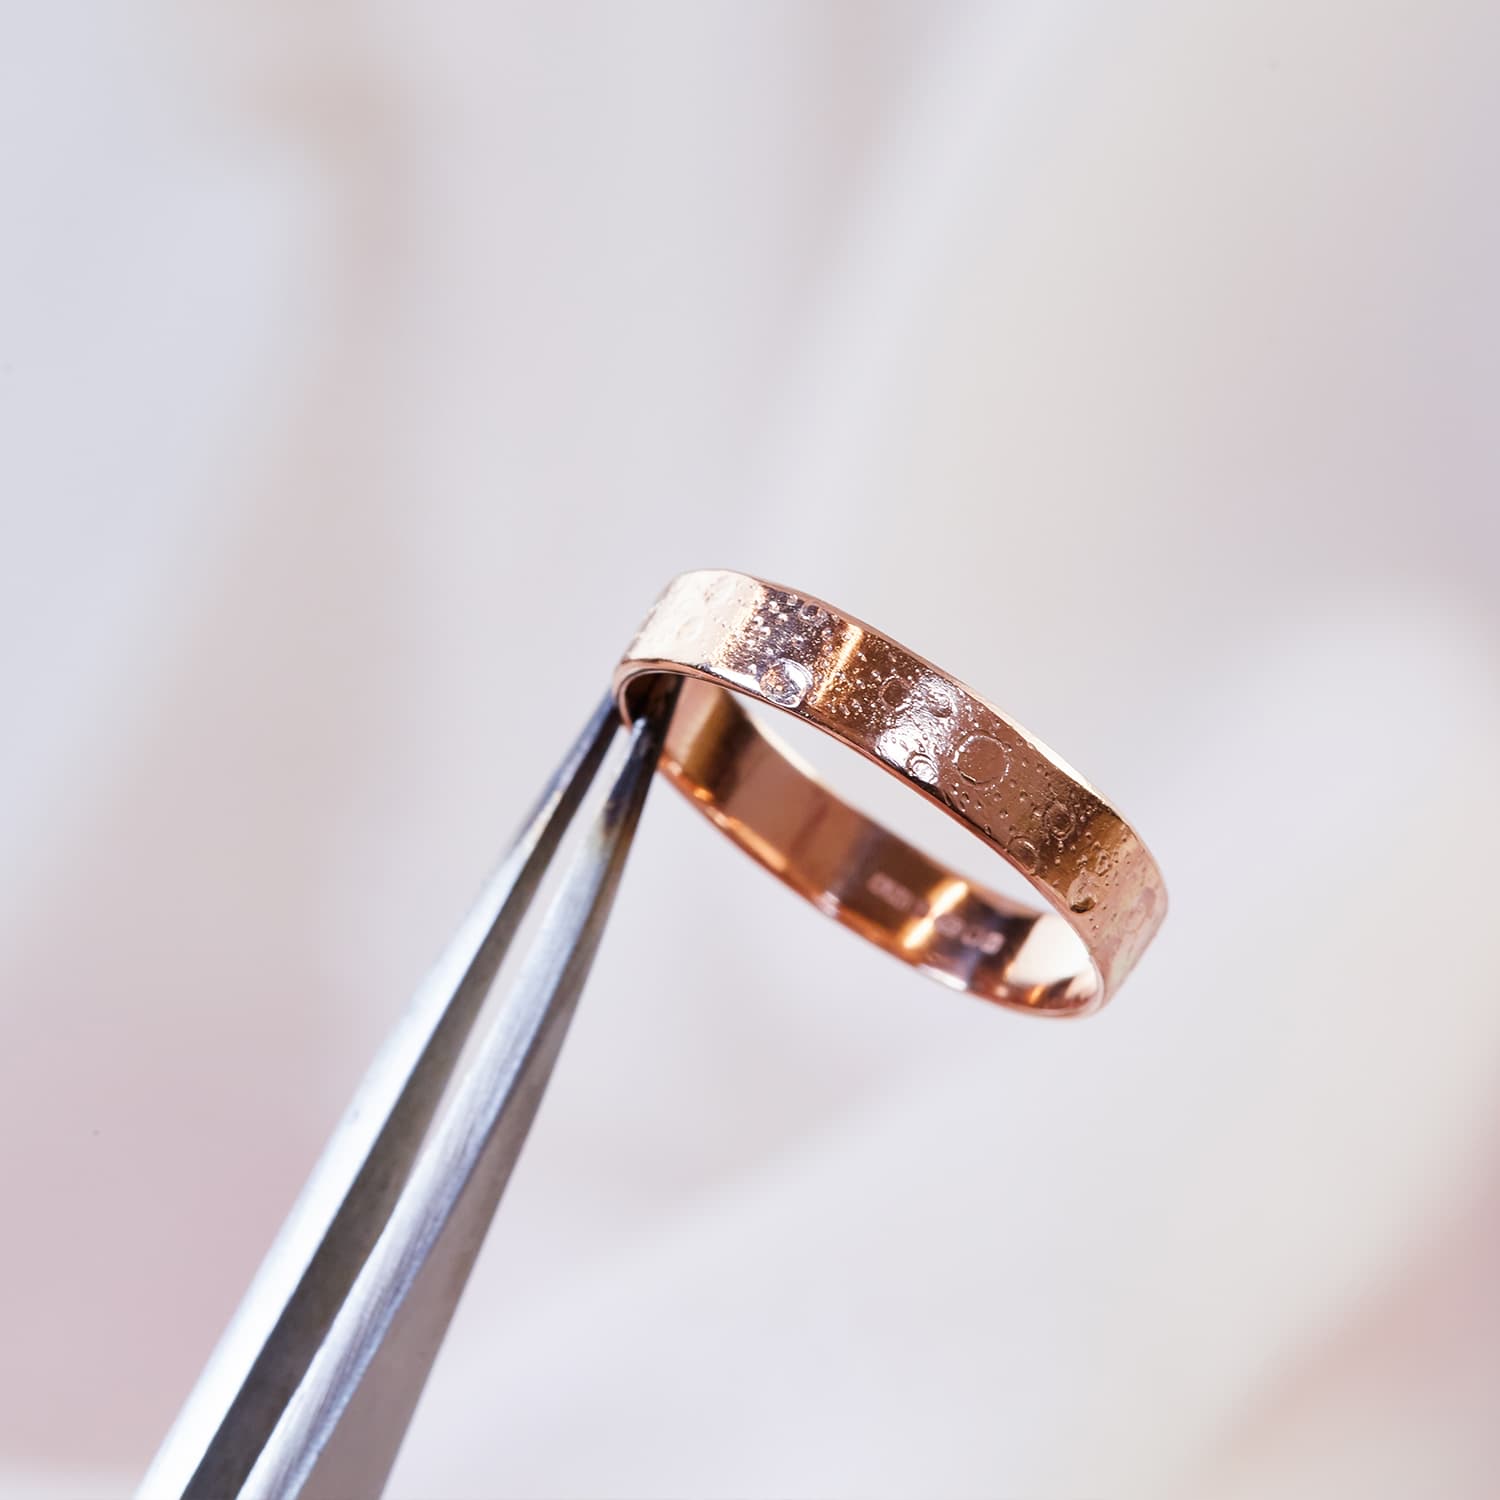 Rose gold One Of A Kind Bespoke detailed band by Alex Monroe Jewellery